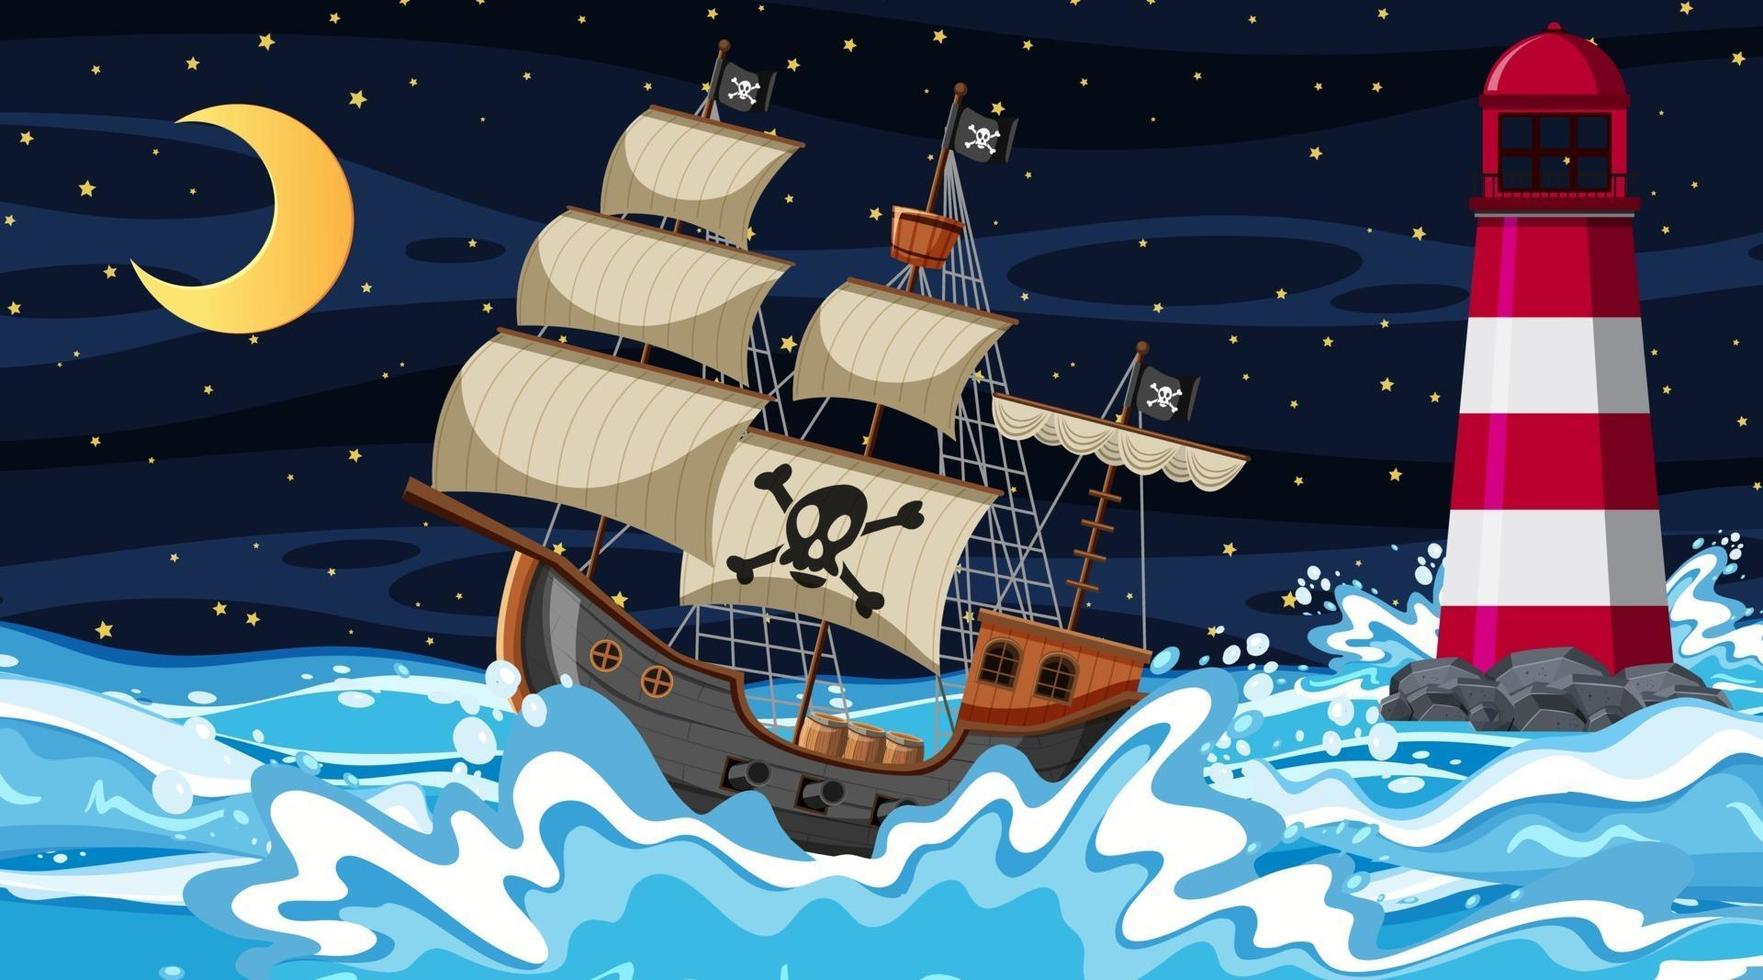 Ocean scene at night with Pirate ship in cartoon style vector